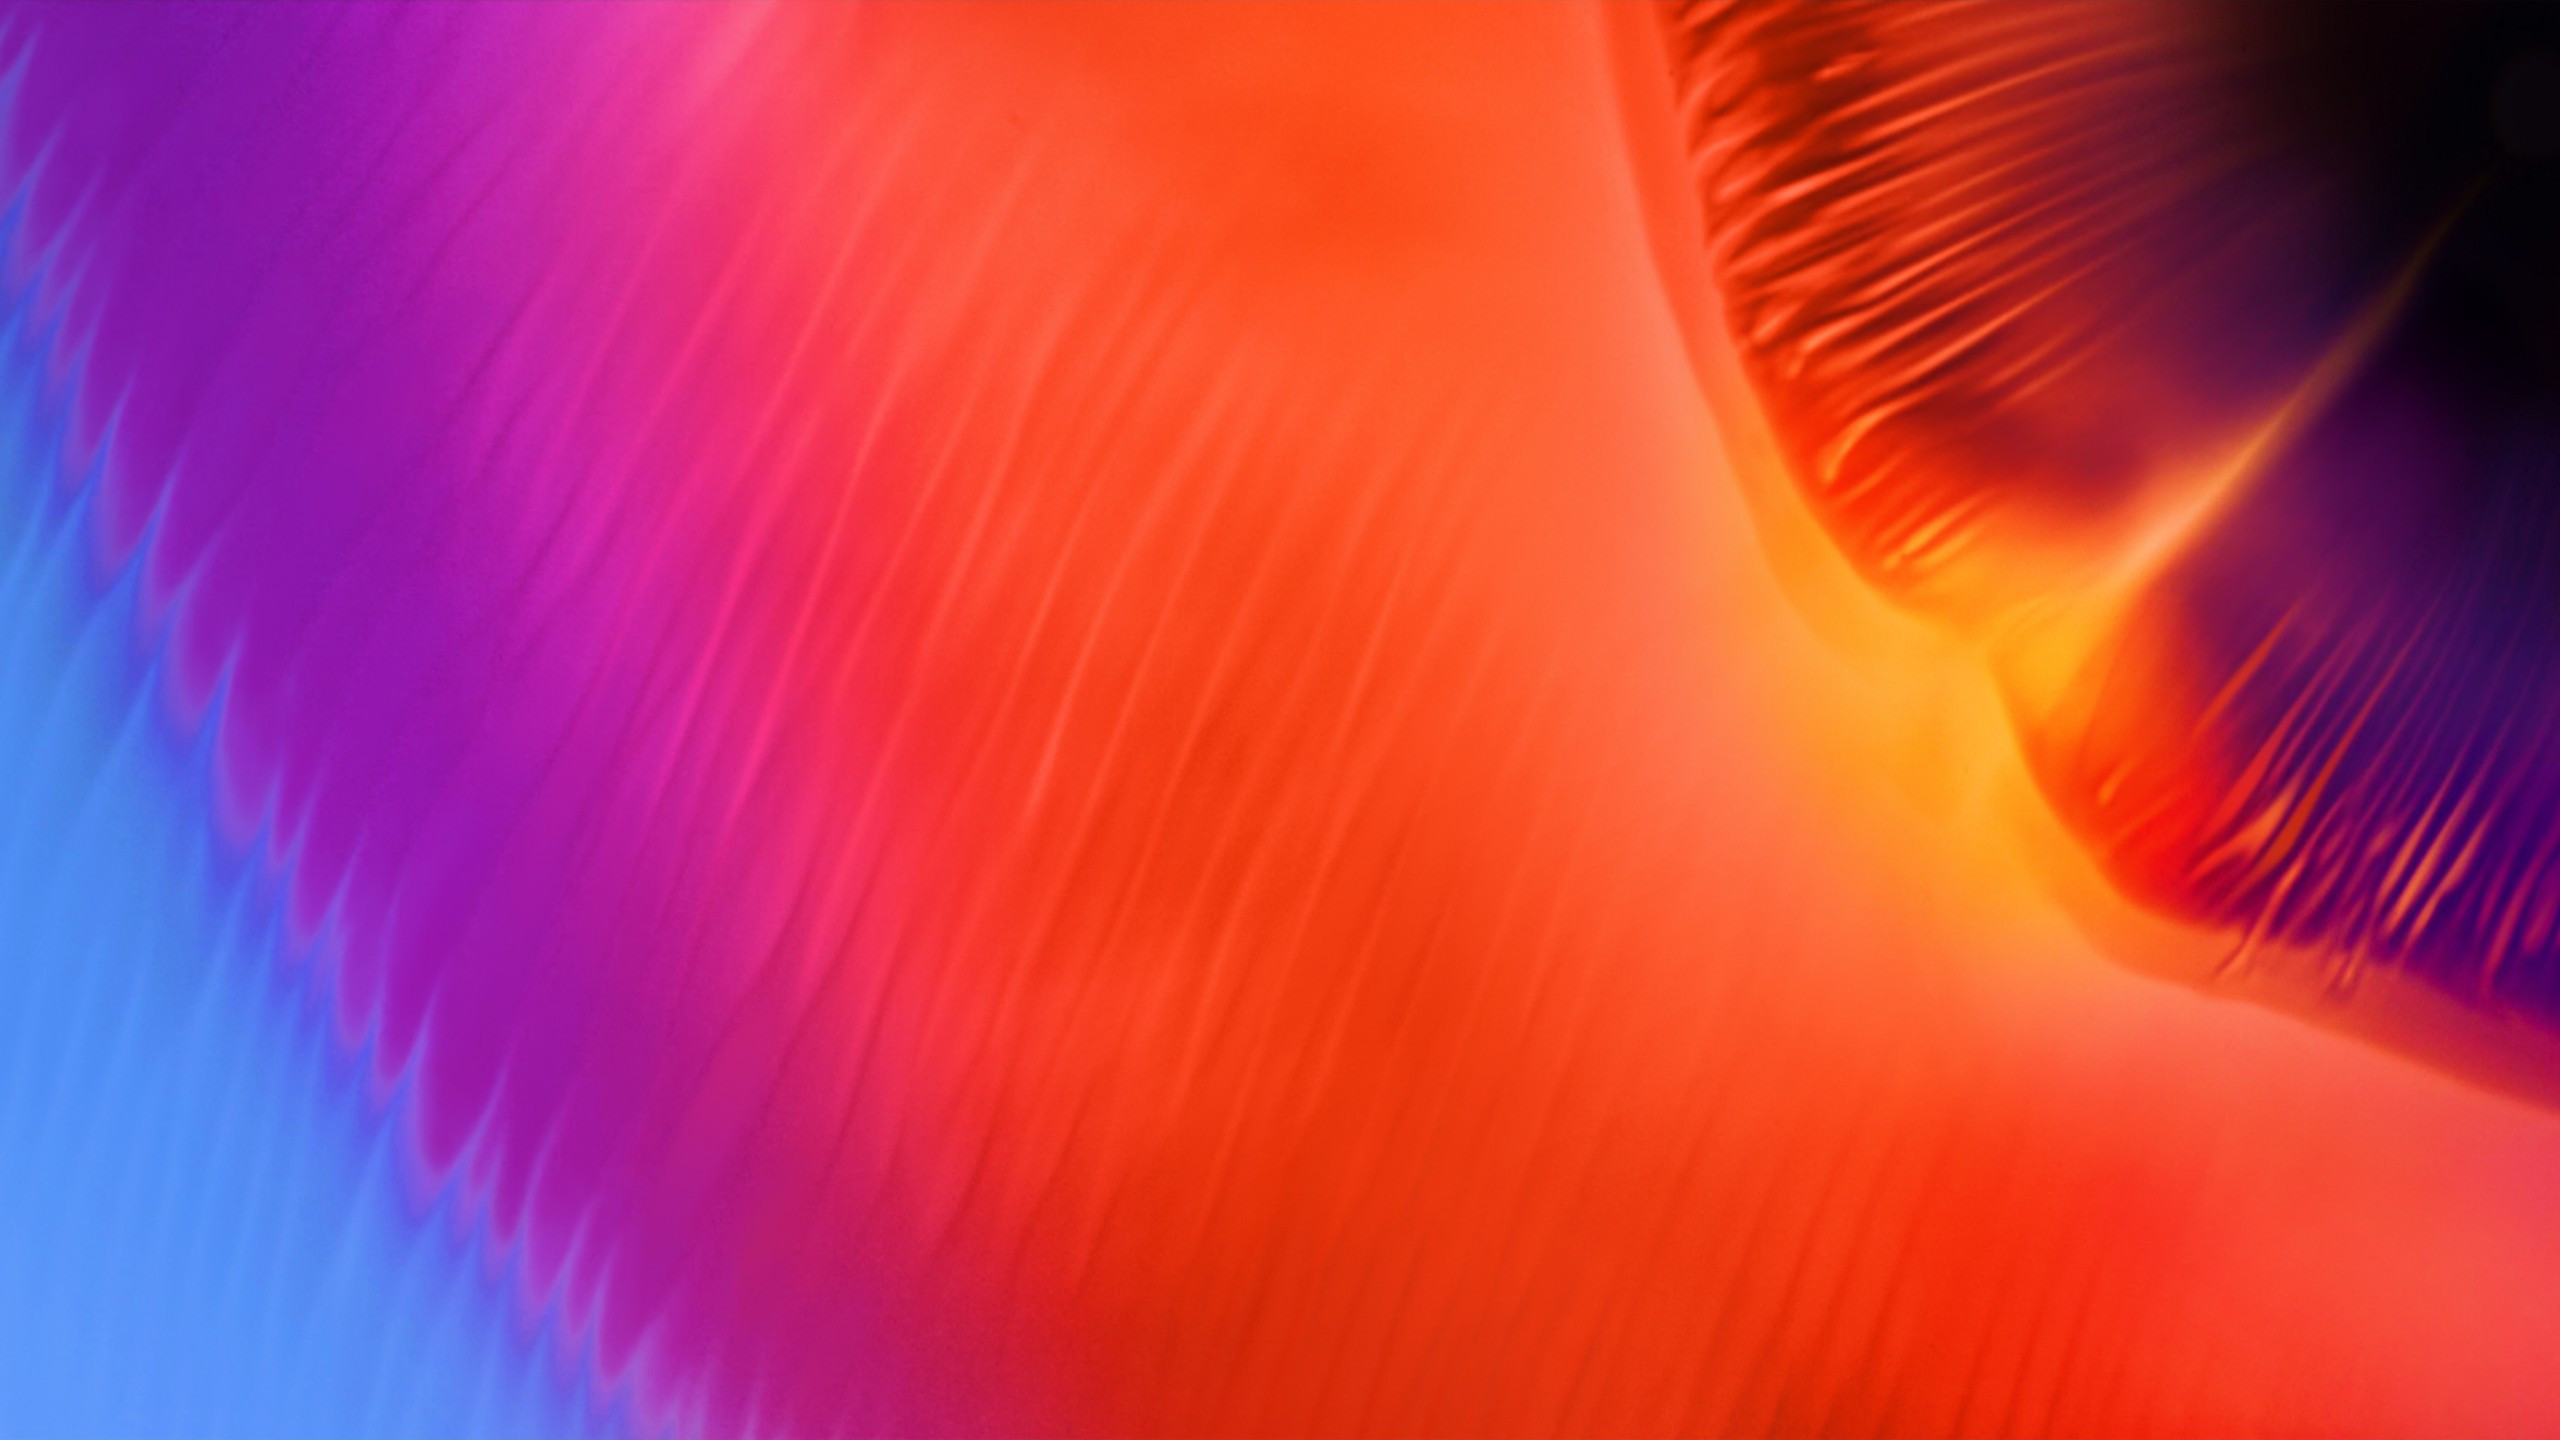 Warm colors in Samsung A8 wallpaper 2560x1440